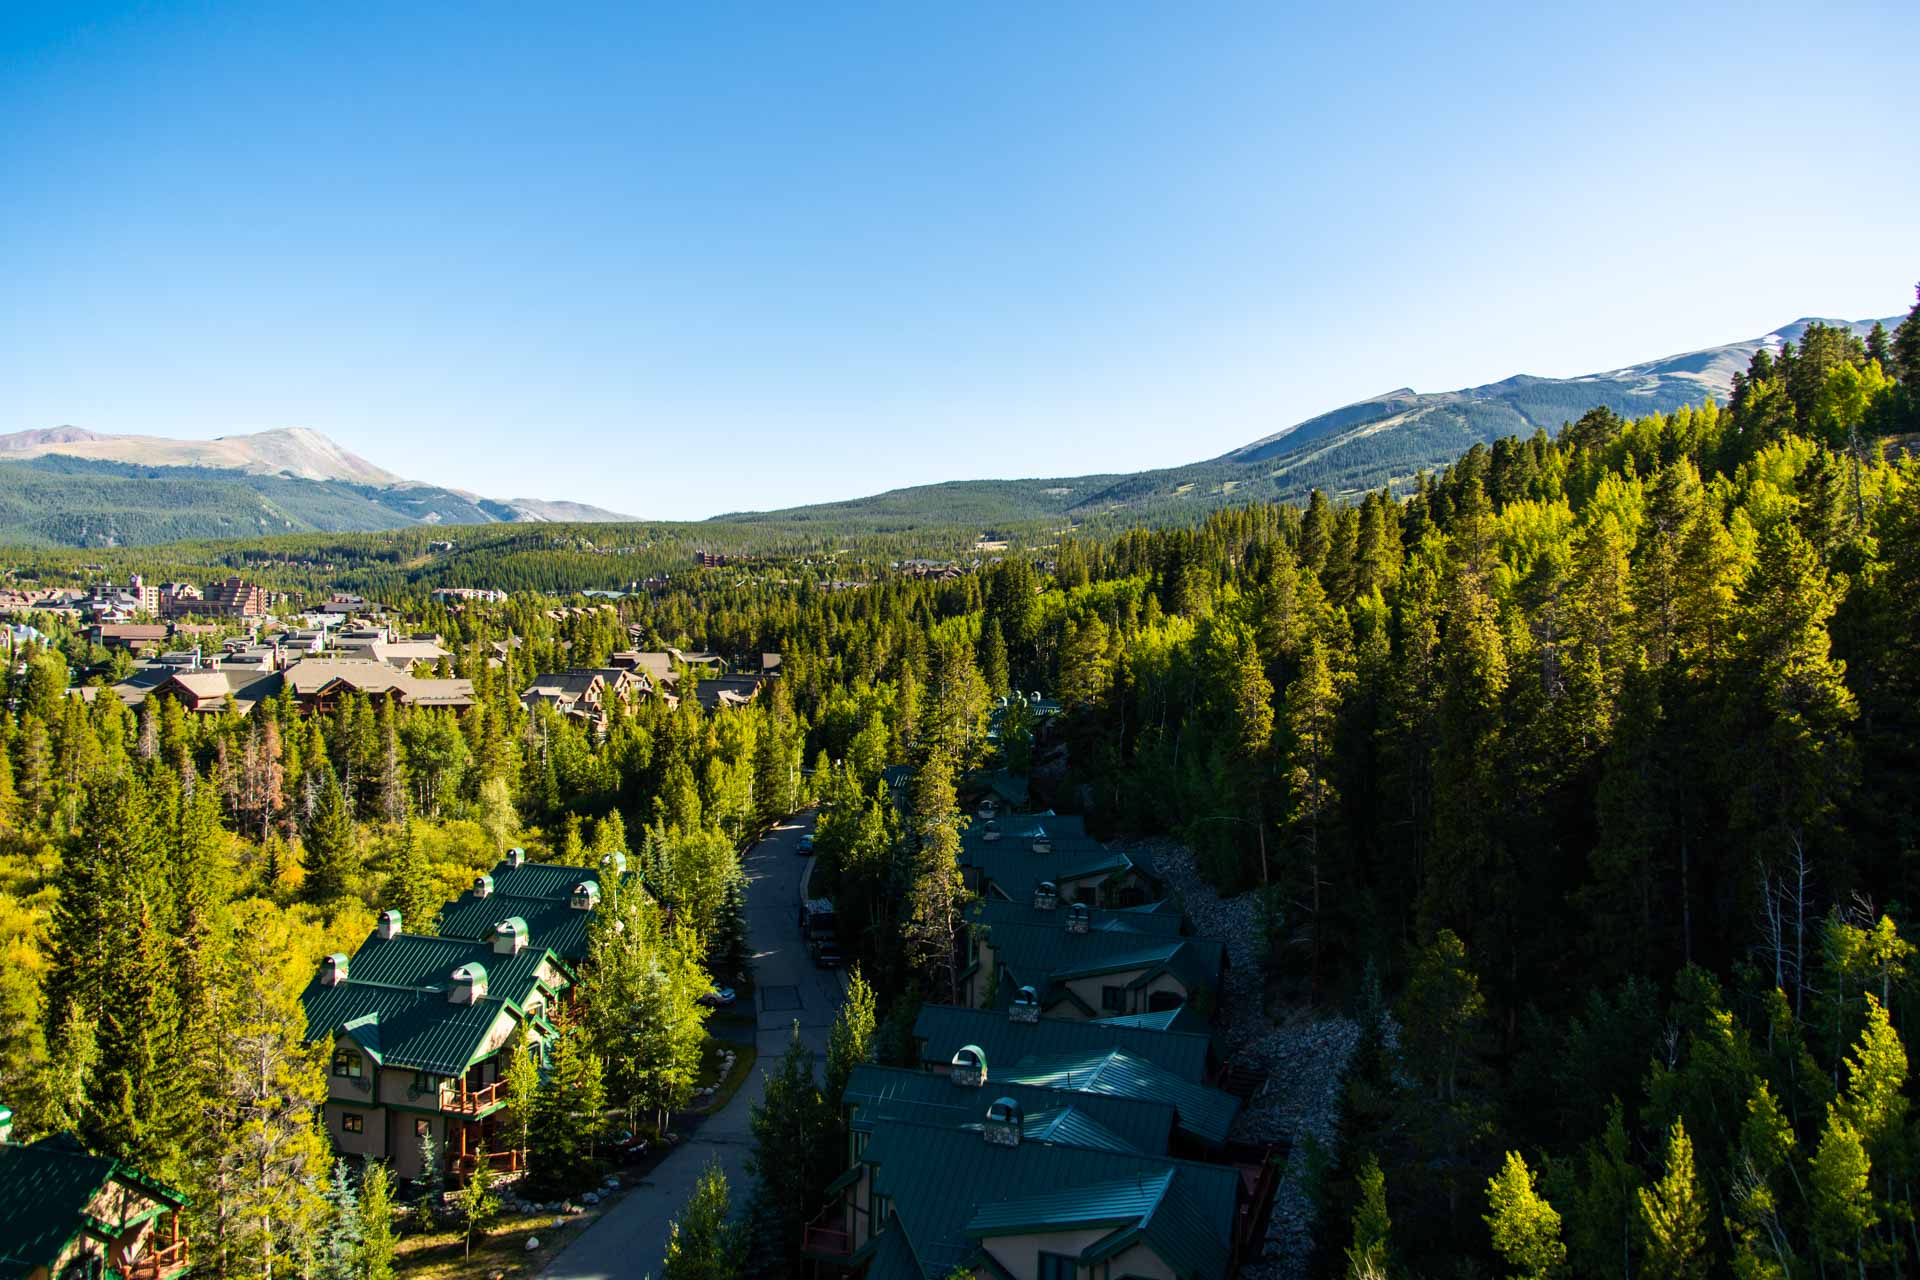 A beautiful view of Breckenridge and the mountains with Summit County short term rental properties